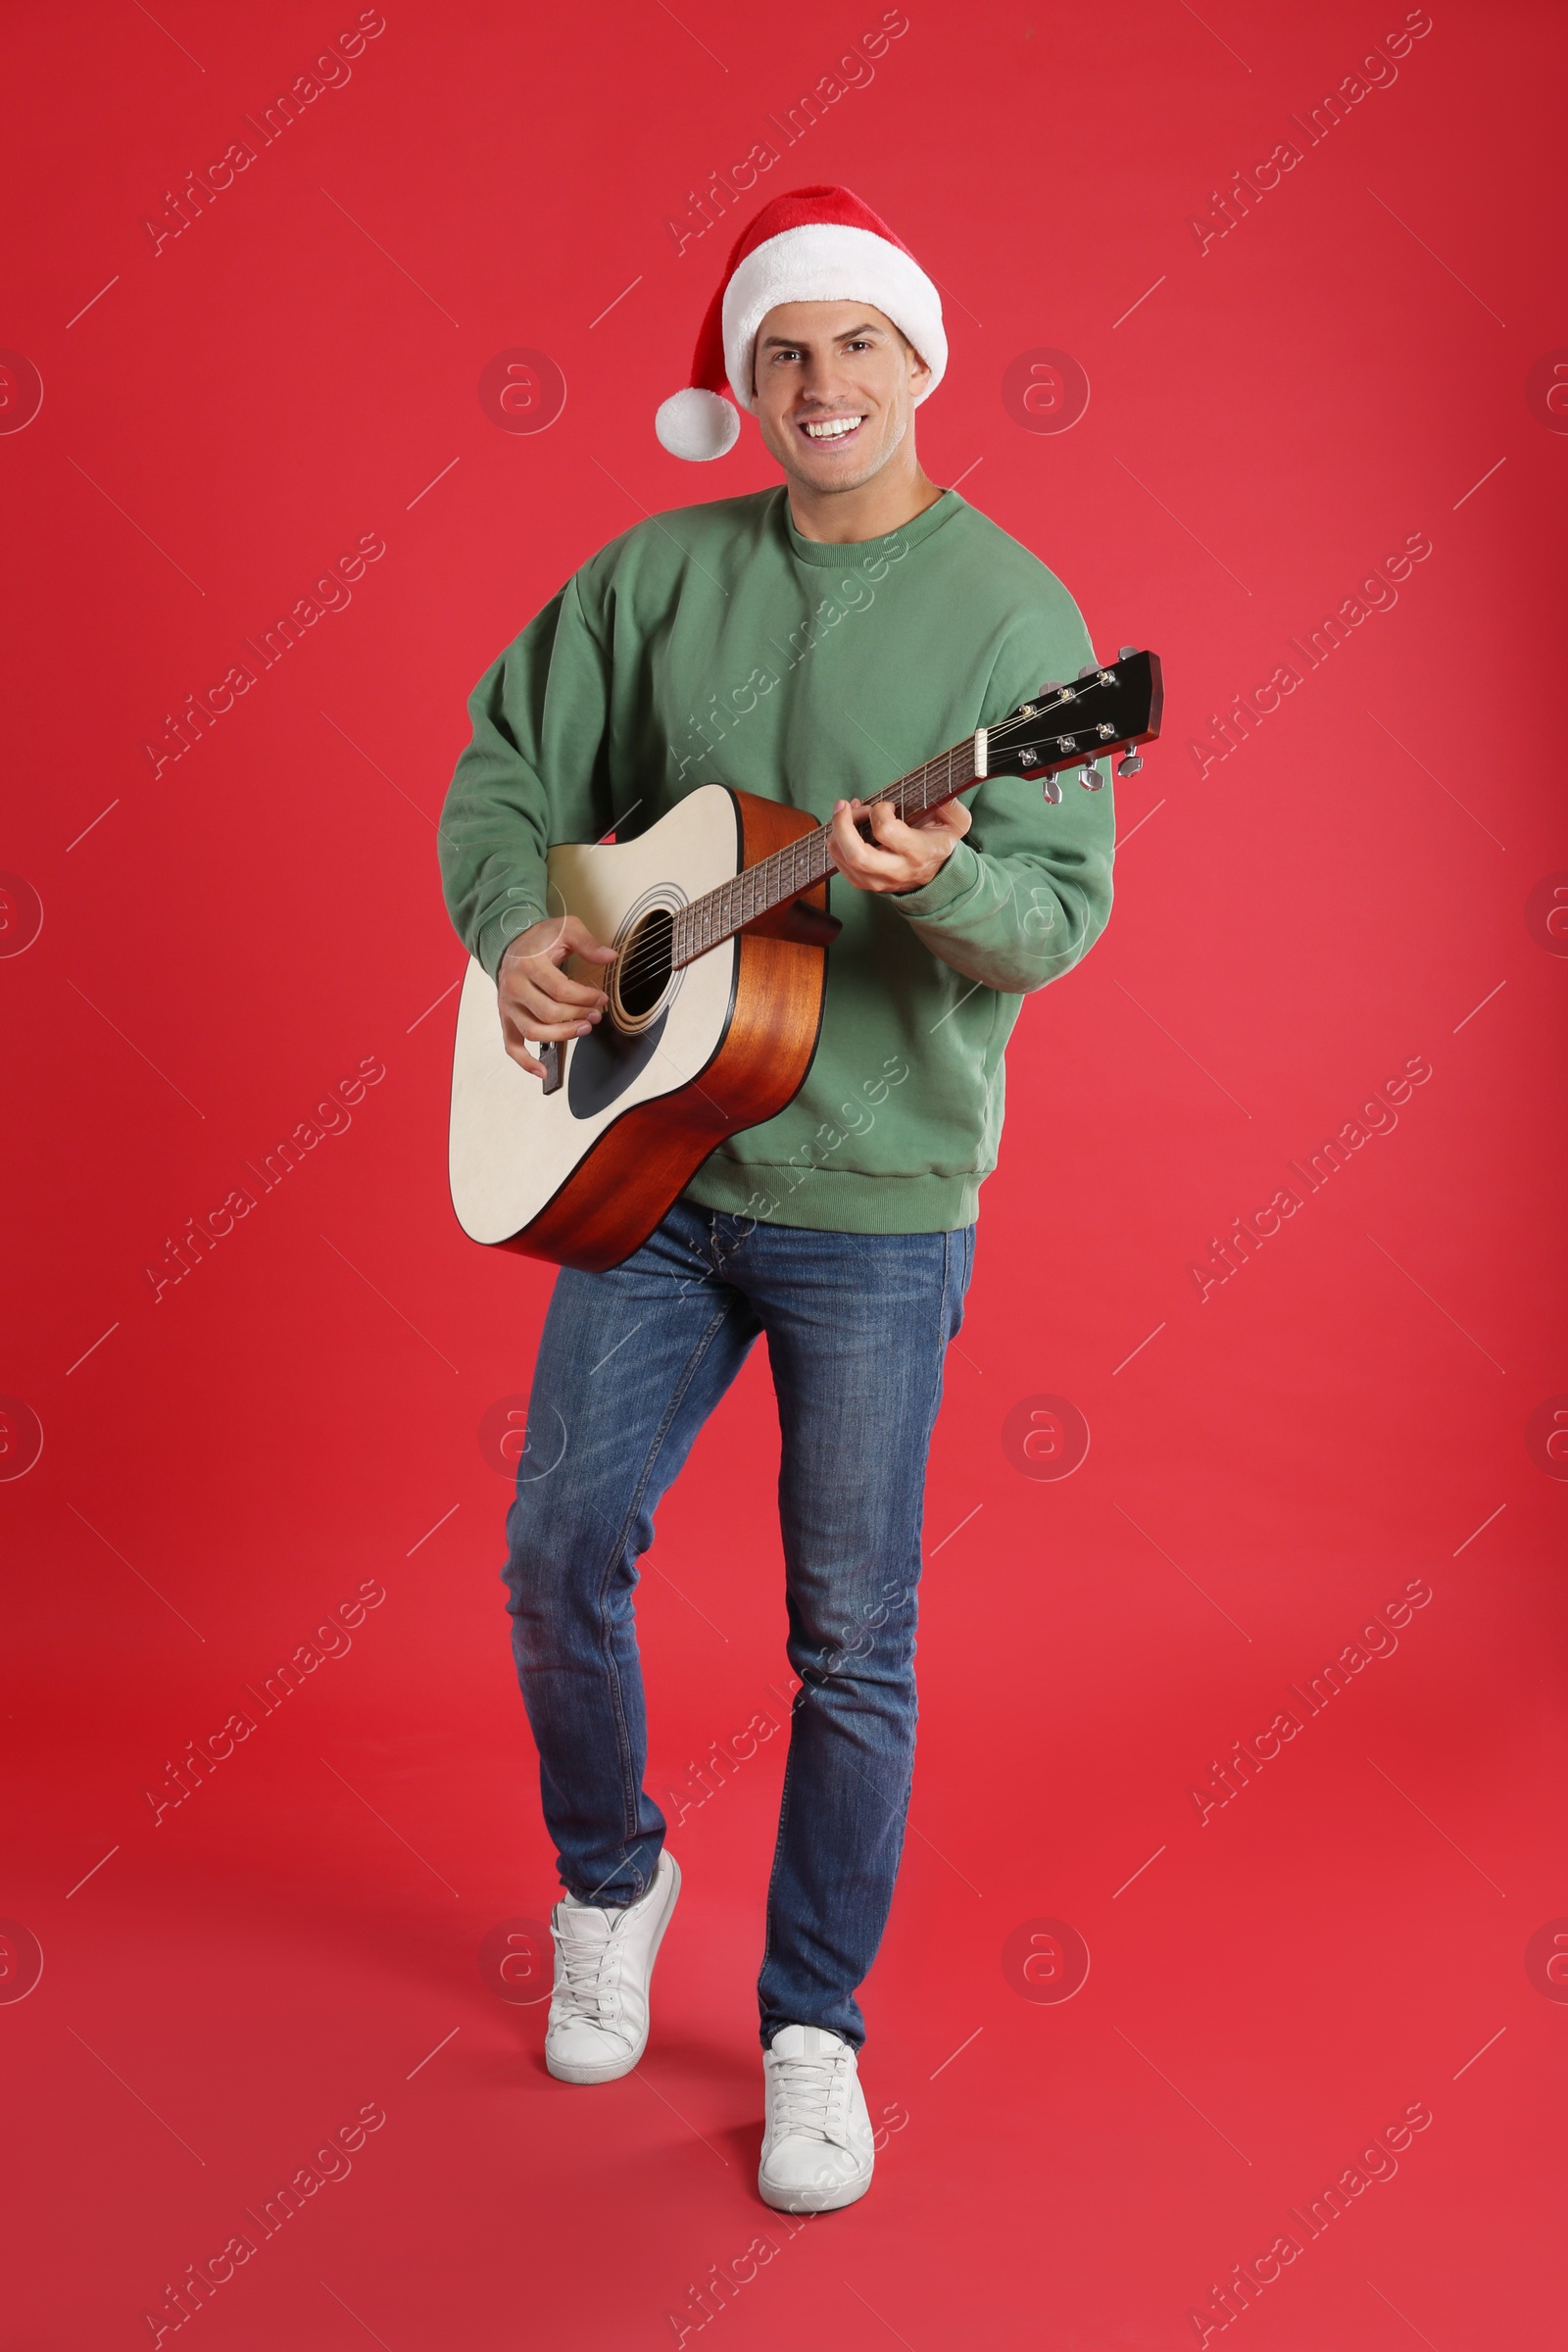 Photo of Man in Santa hat playing acoustic guitar on red background. Christmas music